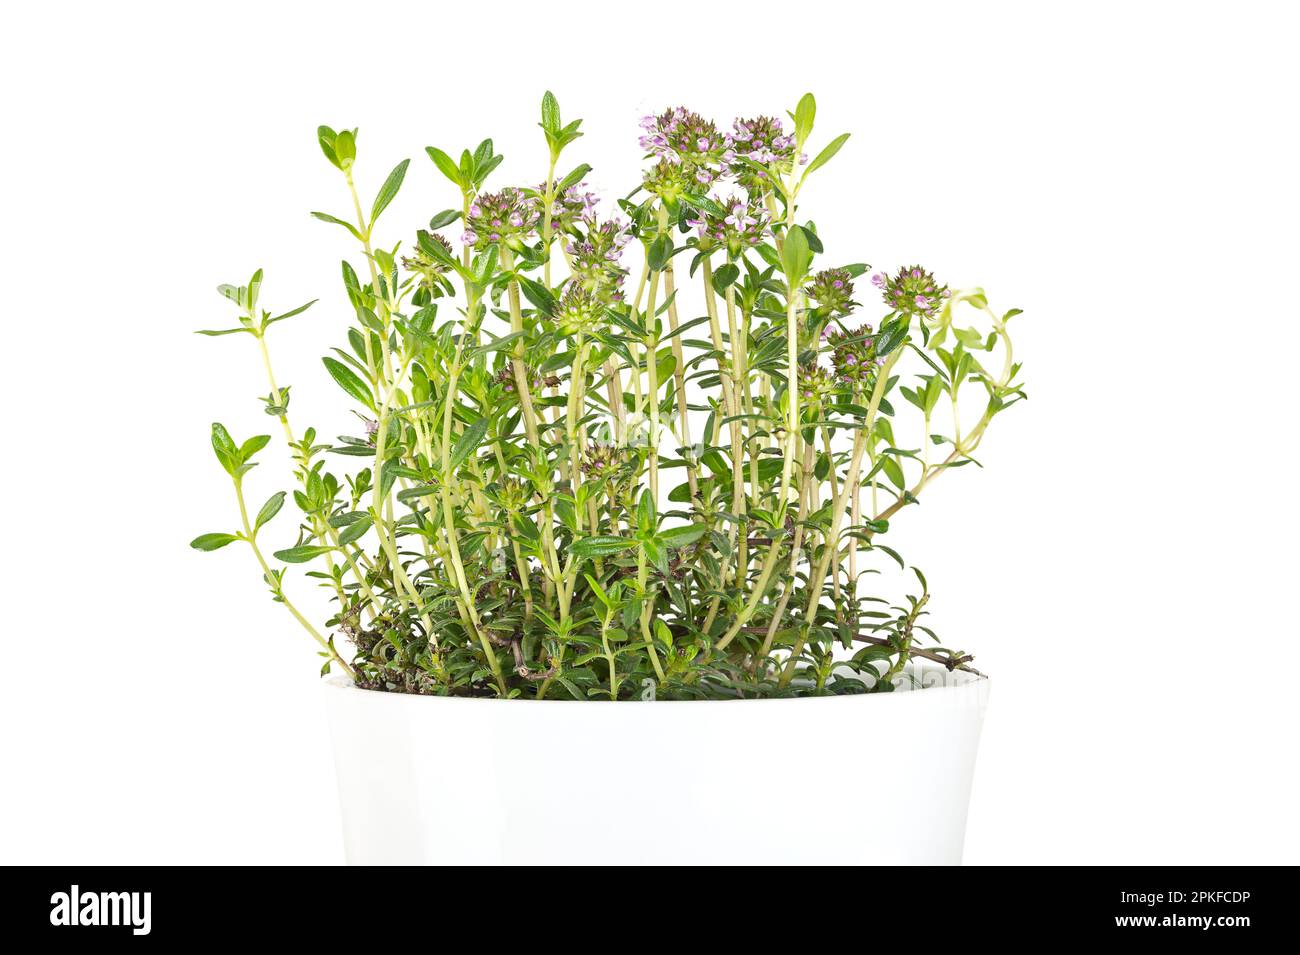 Winter savory, potted young plant, in a white pot. Satureja montana, mountain savory with pale lavender flowers. Culinary herb. Stock Photo